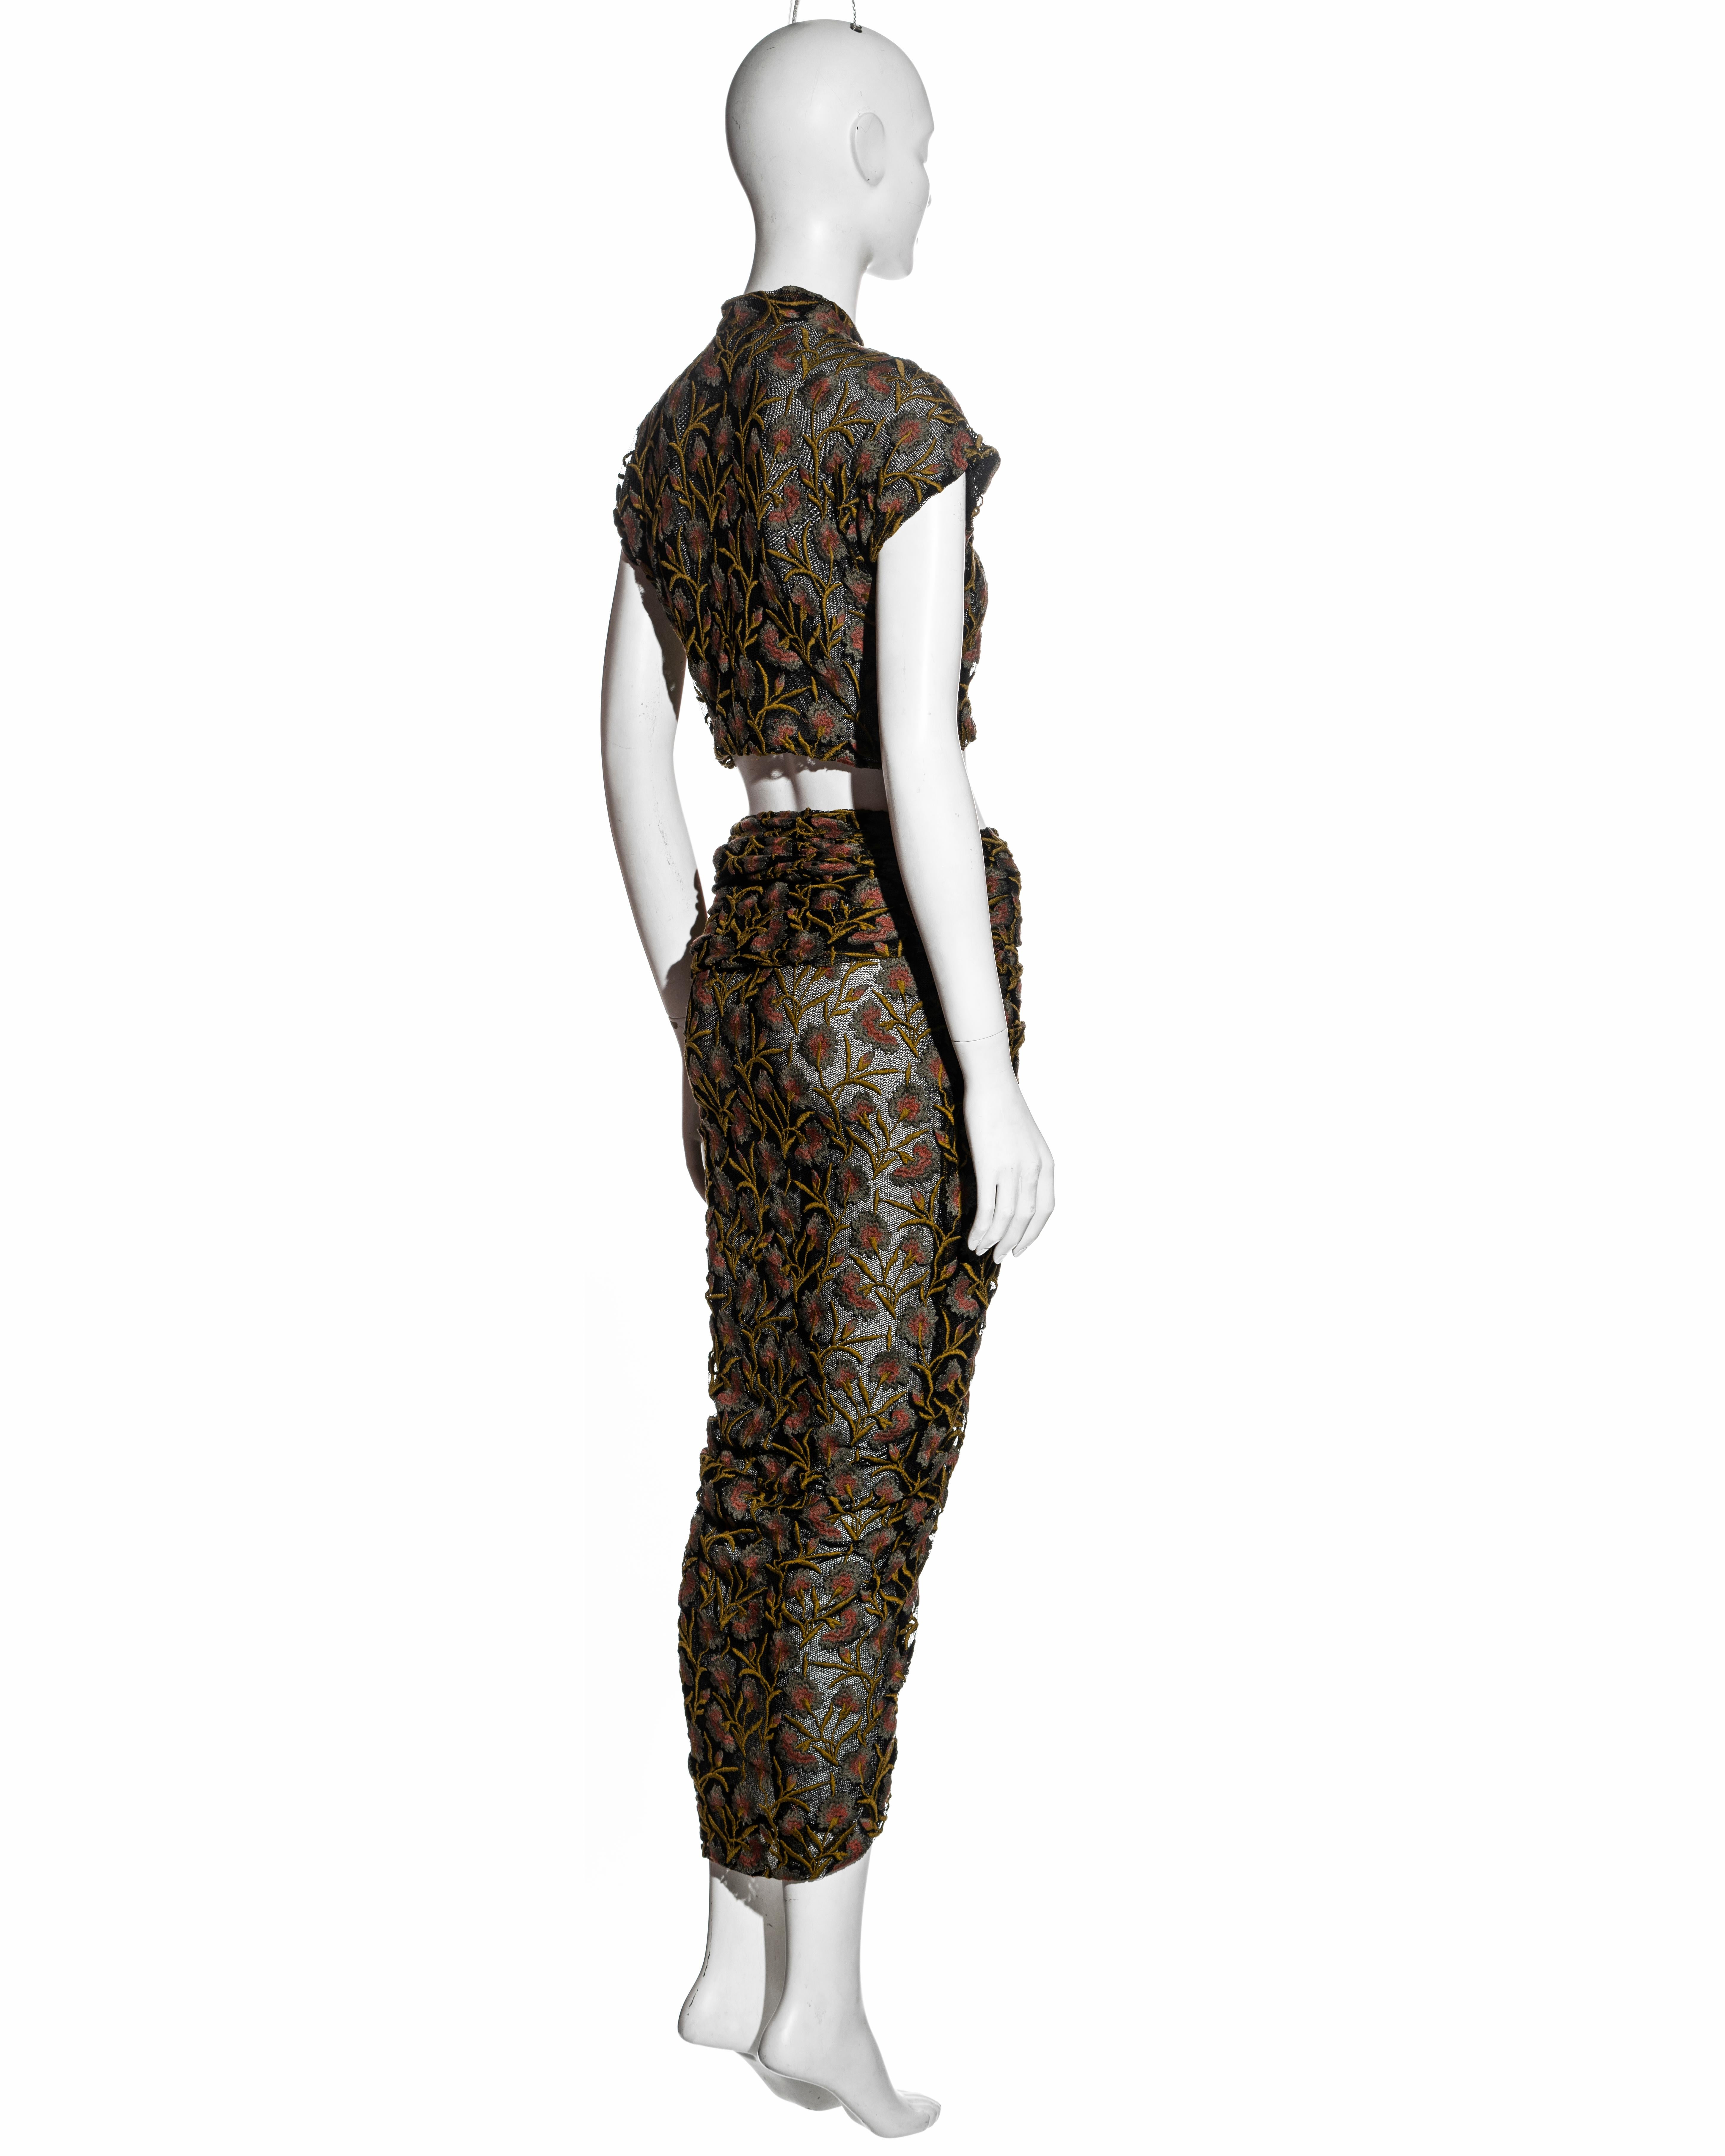 Callaghan by Romeo Gigli embroidered cotton mesh blouse and wrap skirt, ss 1990 For Sale 2